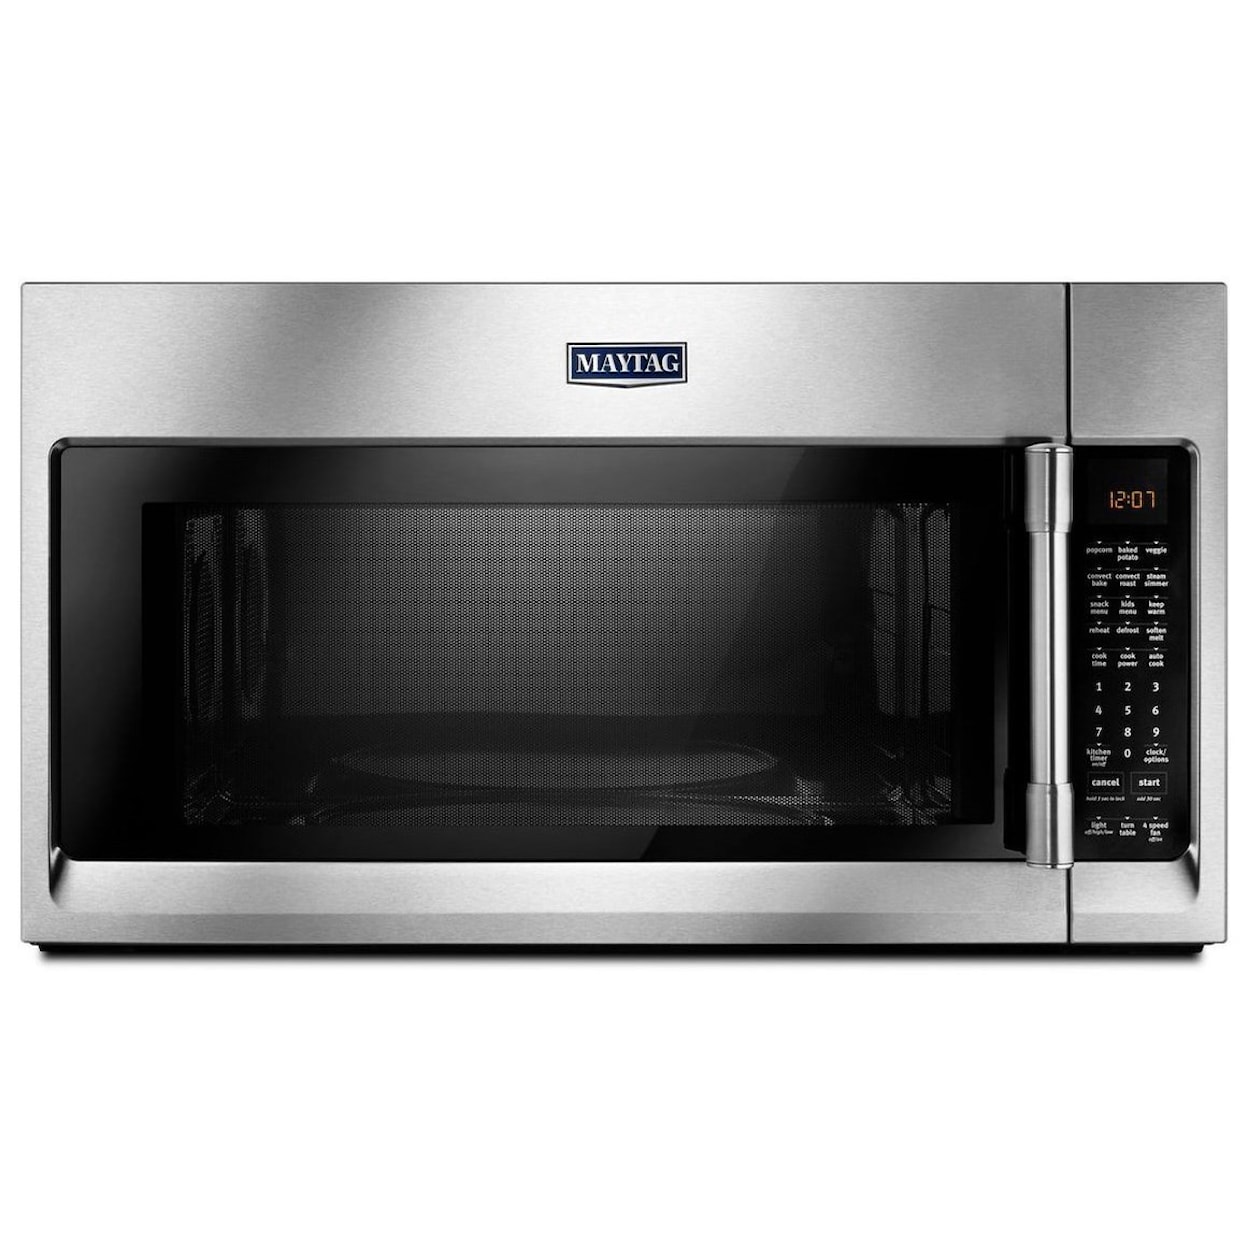 Maytag Microwaves Over-The-Range Microwave With Convection